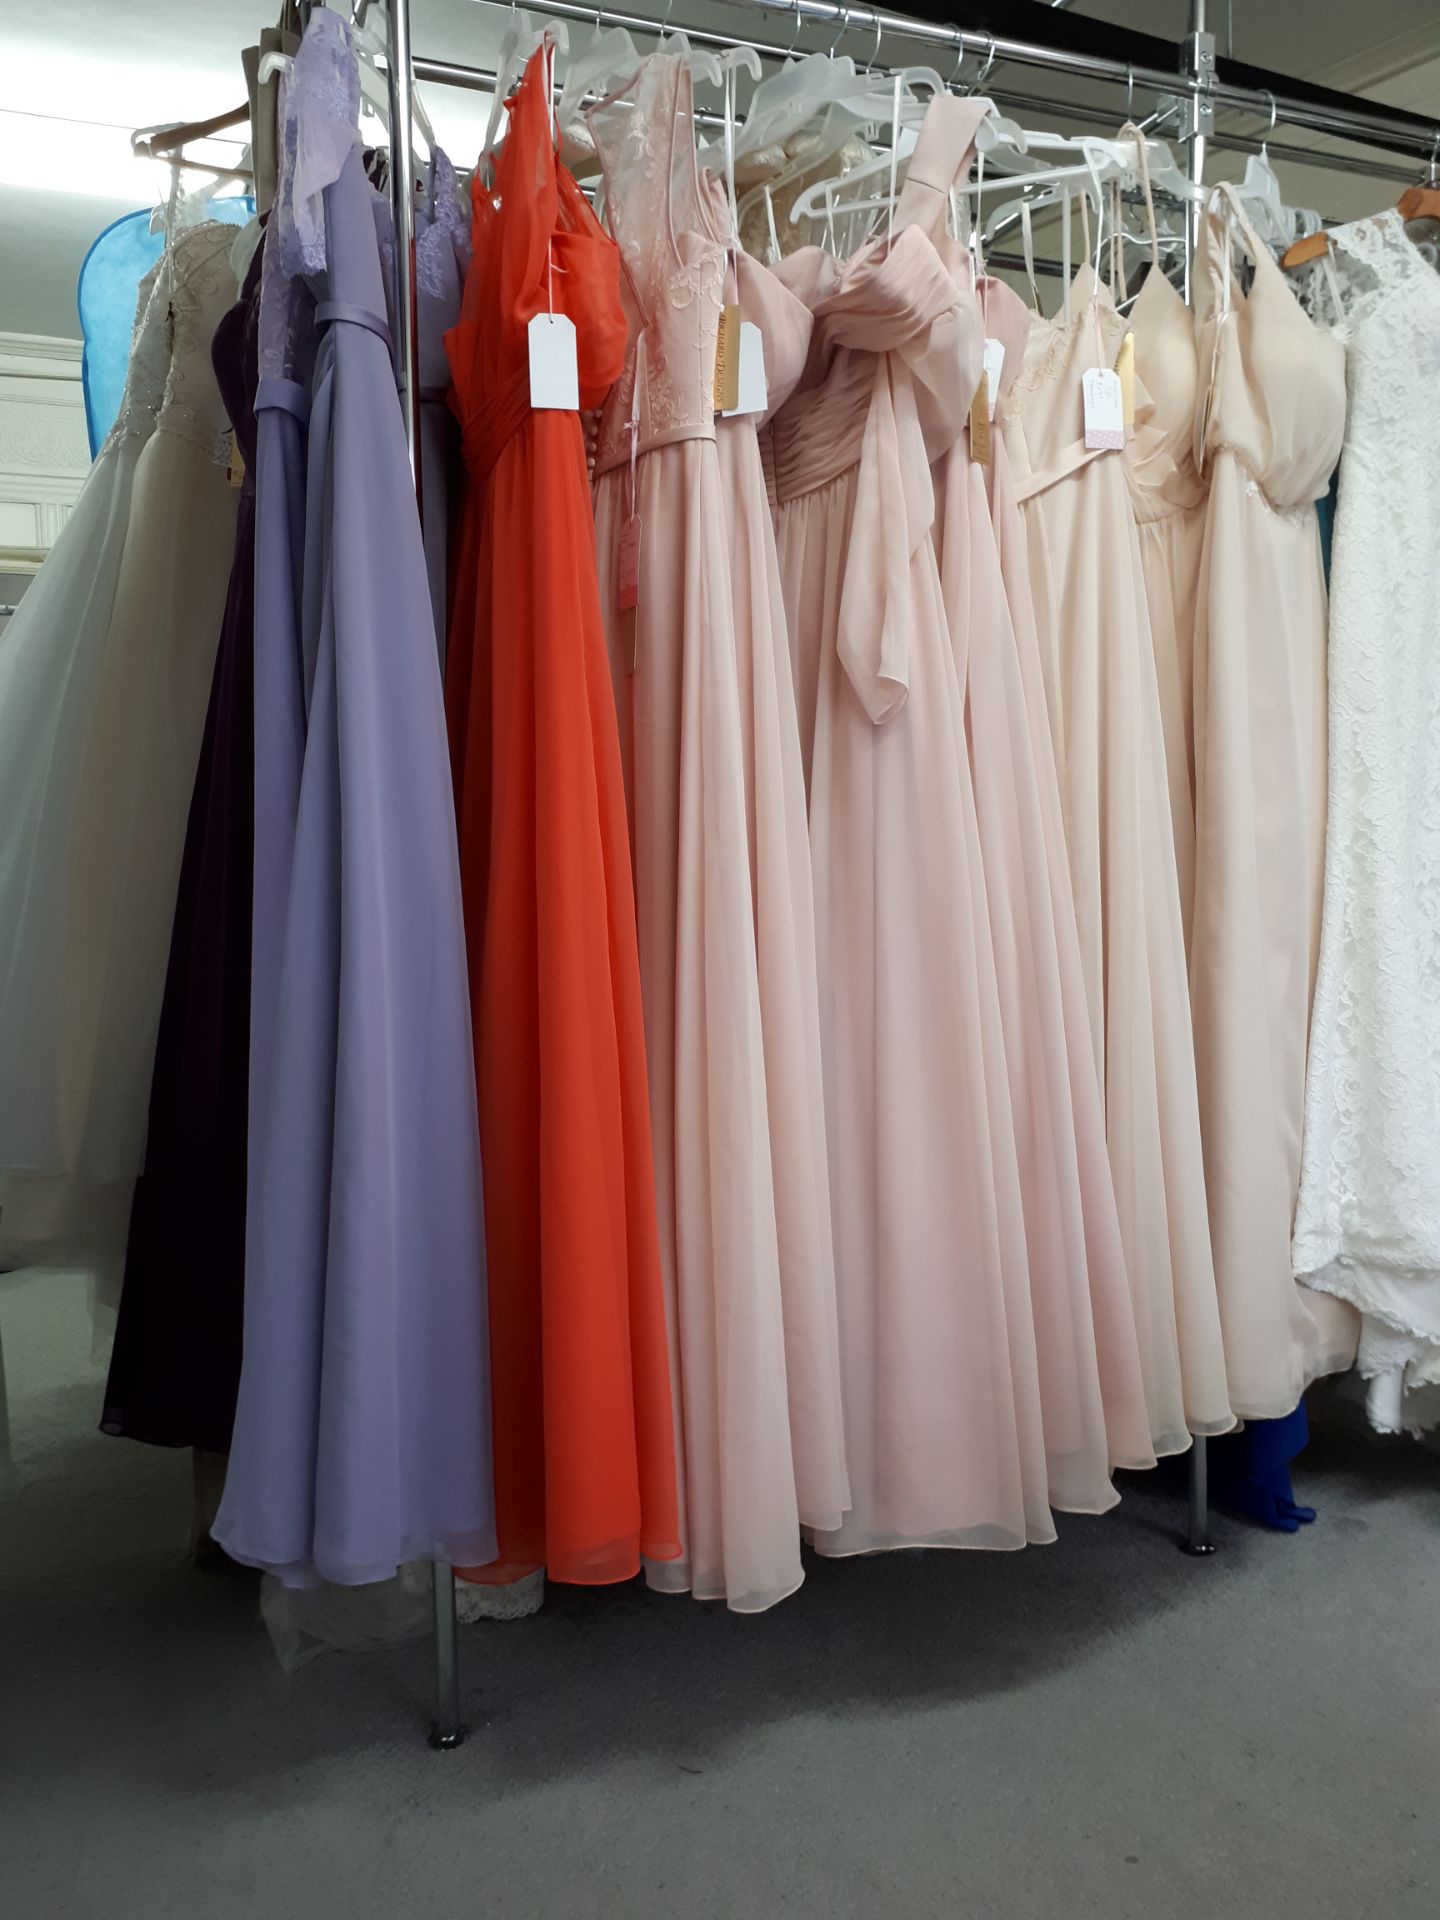 Bridesmaid Or Prom Dresses From Richard Designs Mixed Sizes and Colours. 10 Dresses - Image 2 of 9